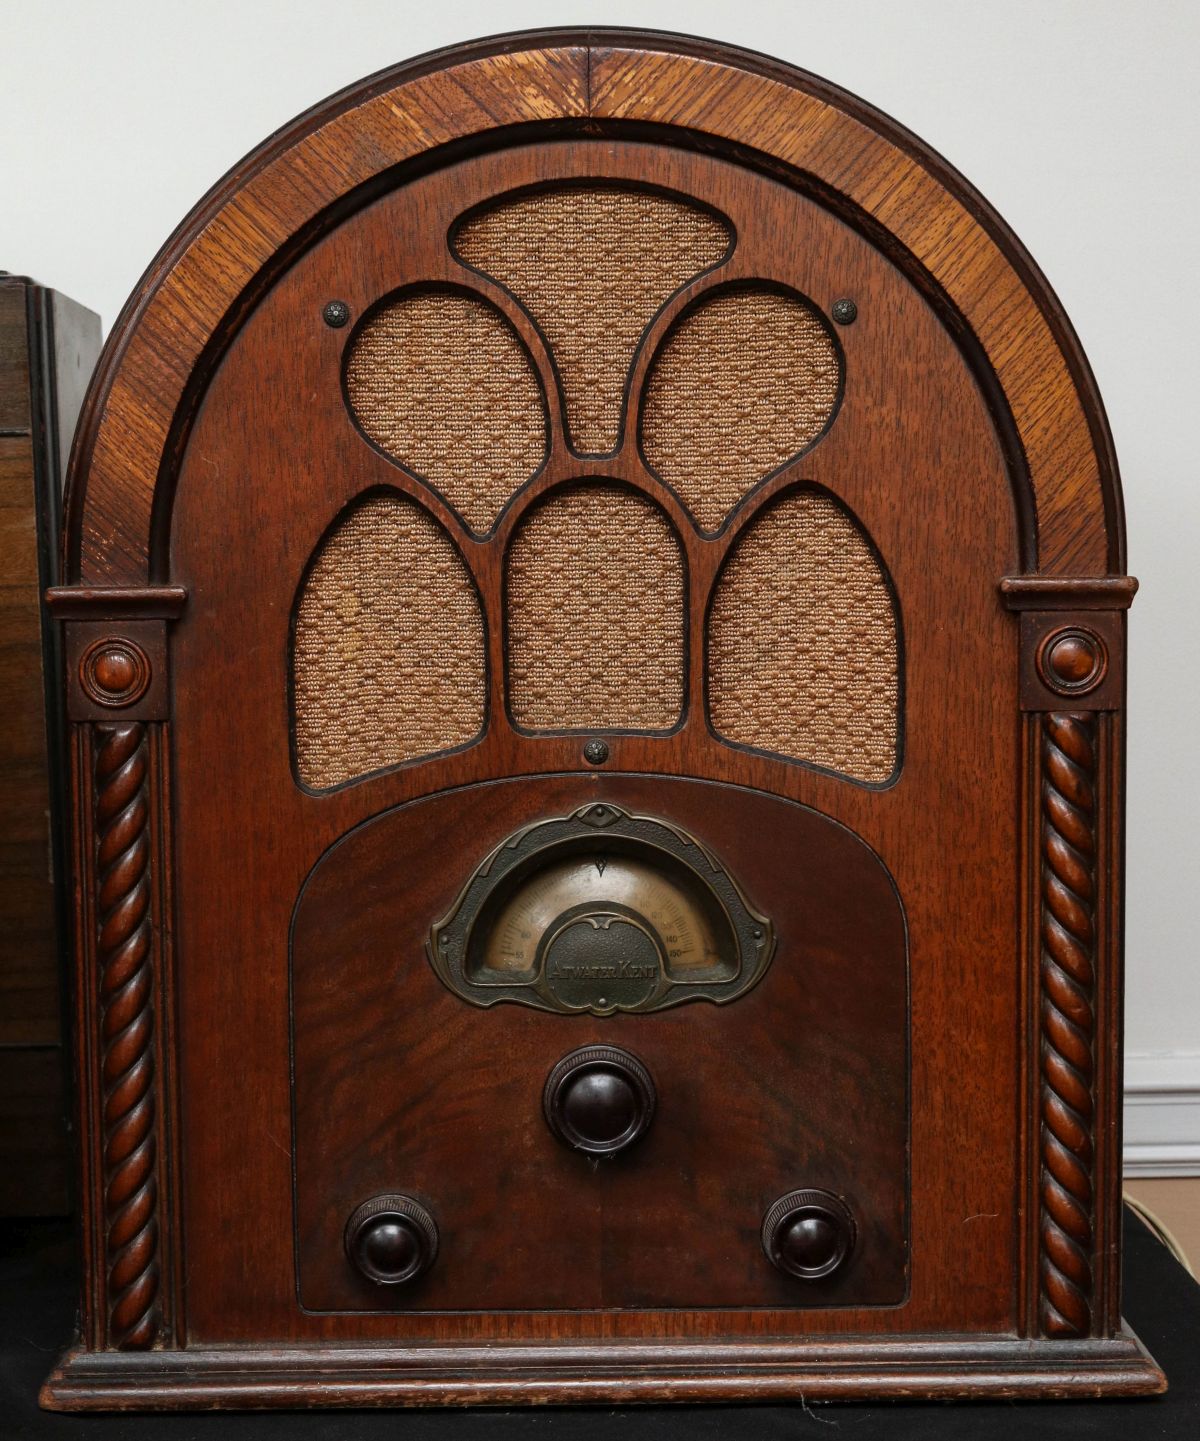 A 1930s ATWATER KENT WOOD CASE TABLE TOP RADIO